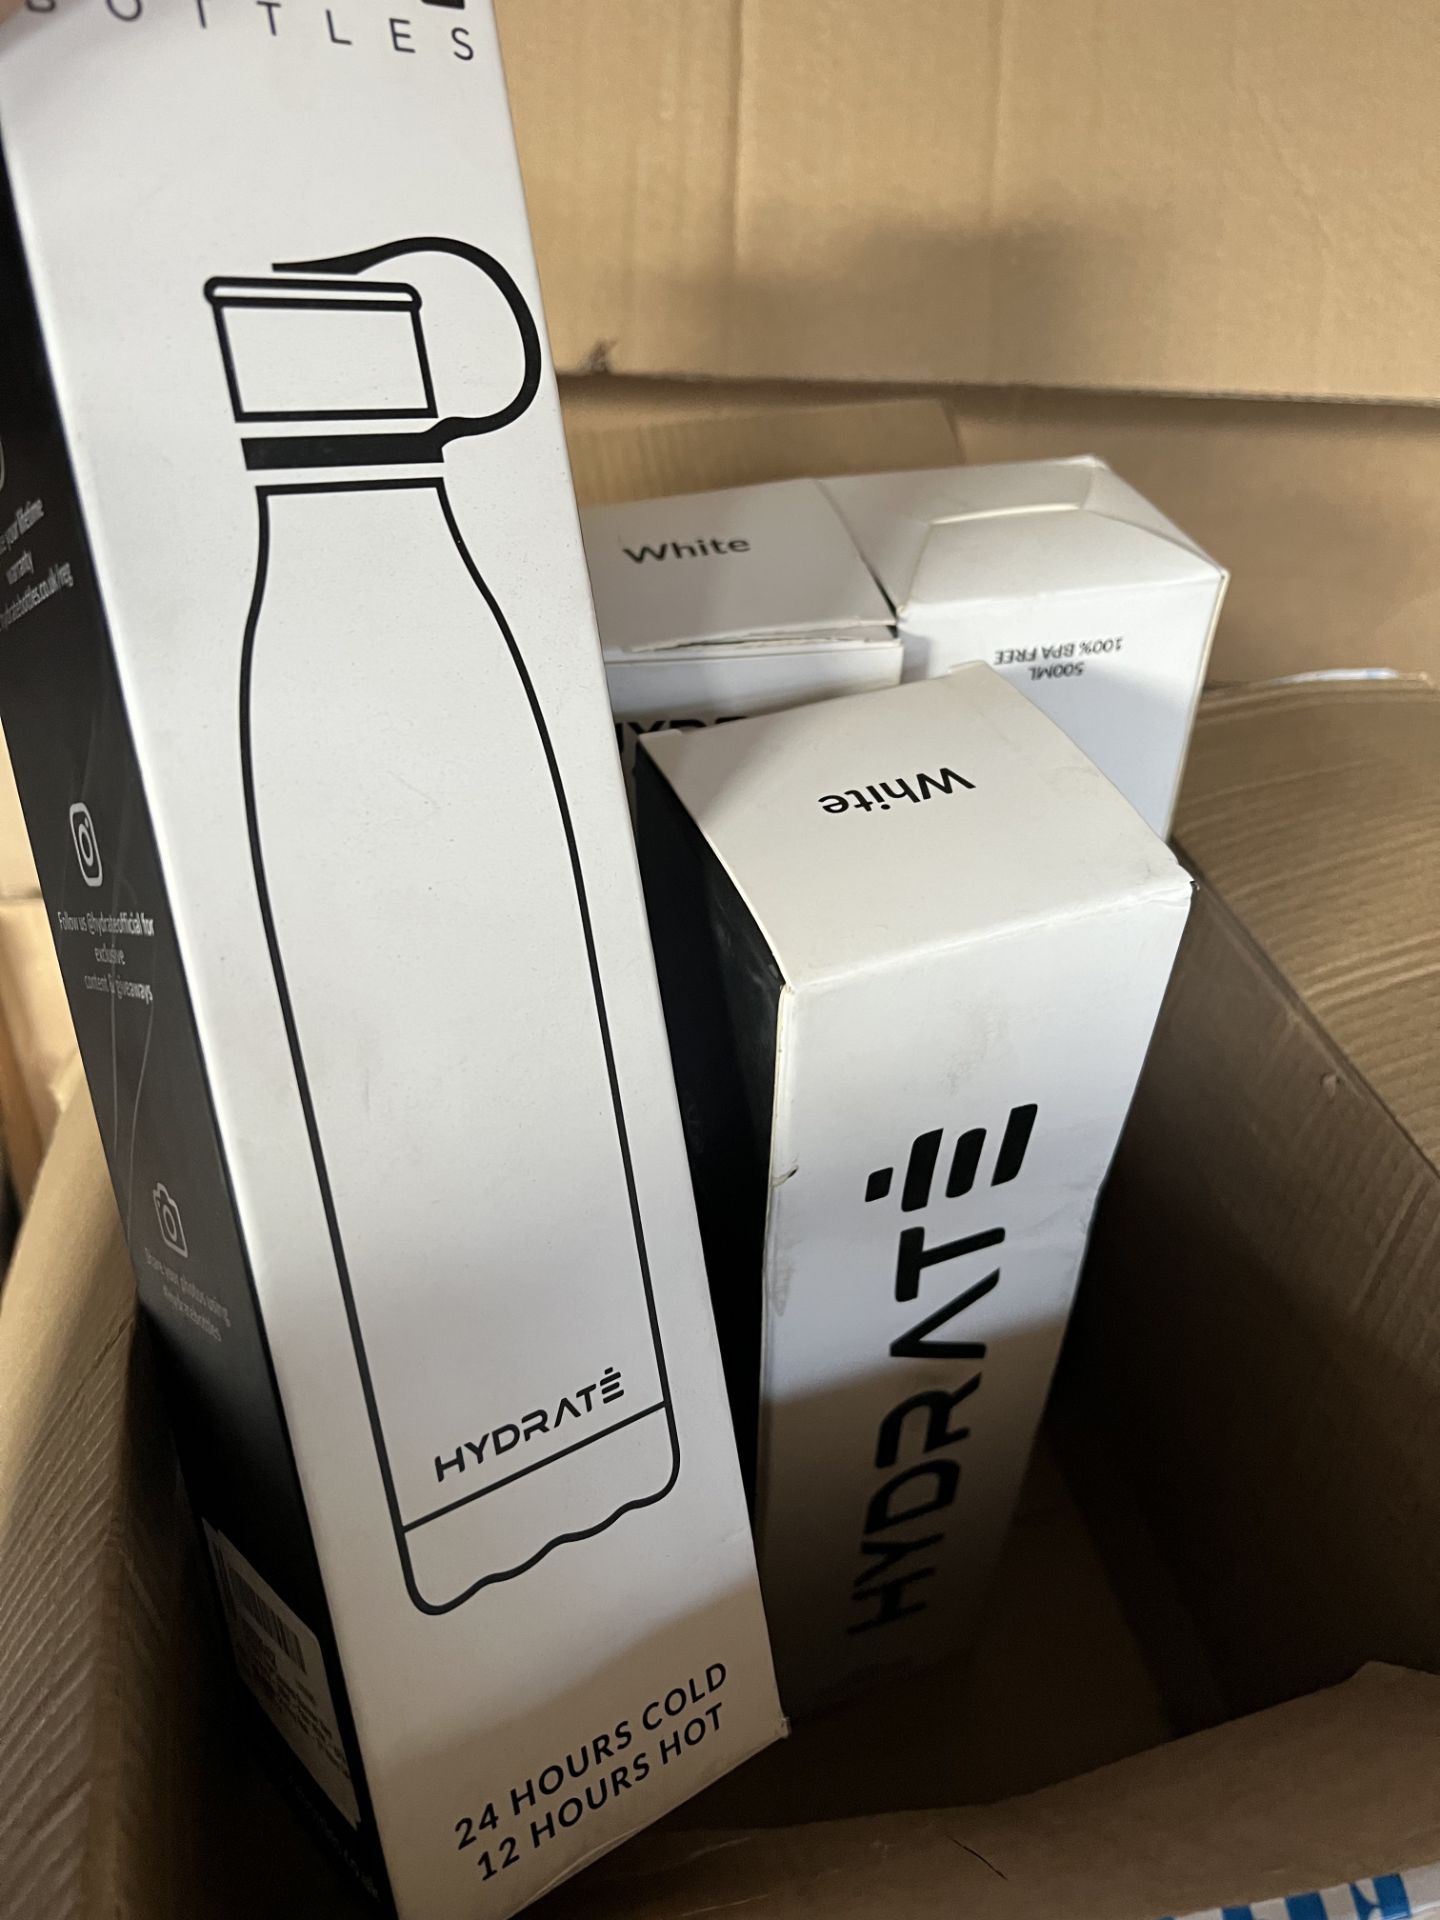 5 x HYDRATE Super Insulated Stainless Steel Water Bottles in White - 500ml - (NEW) - RRP Â£74+ ! - Image 2 of 2